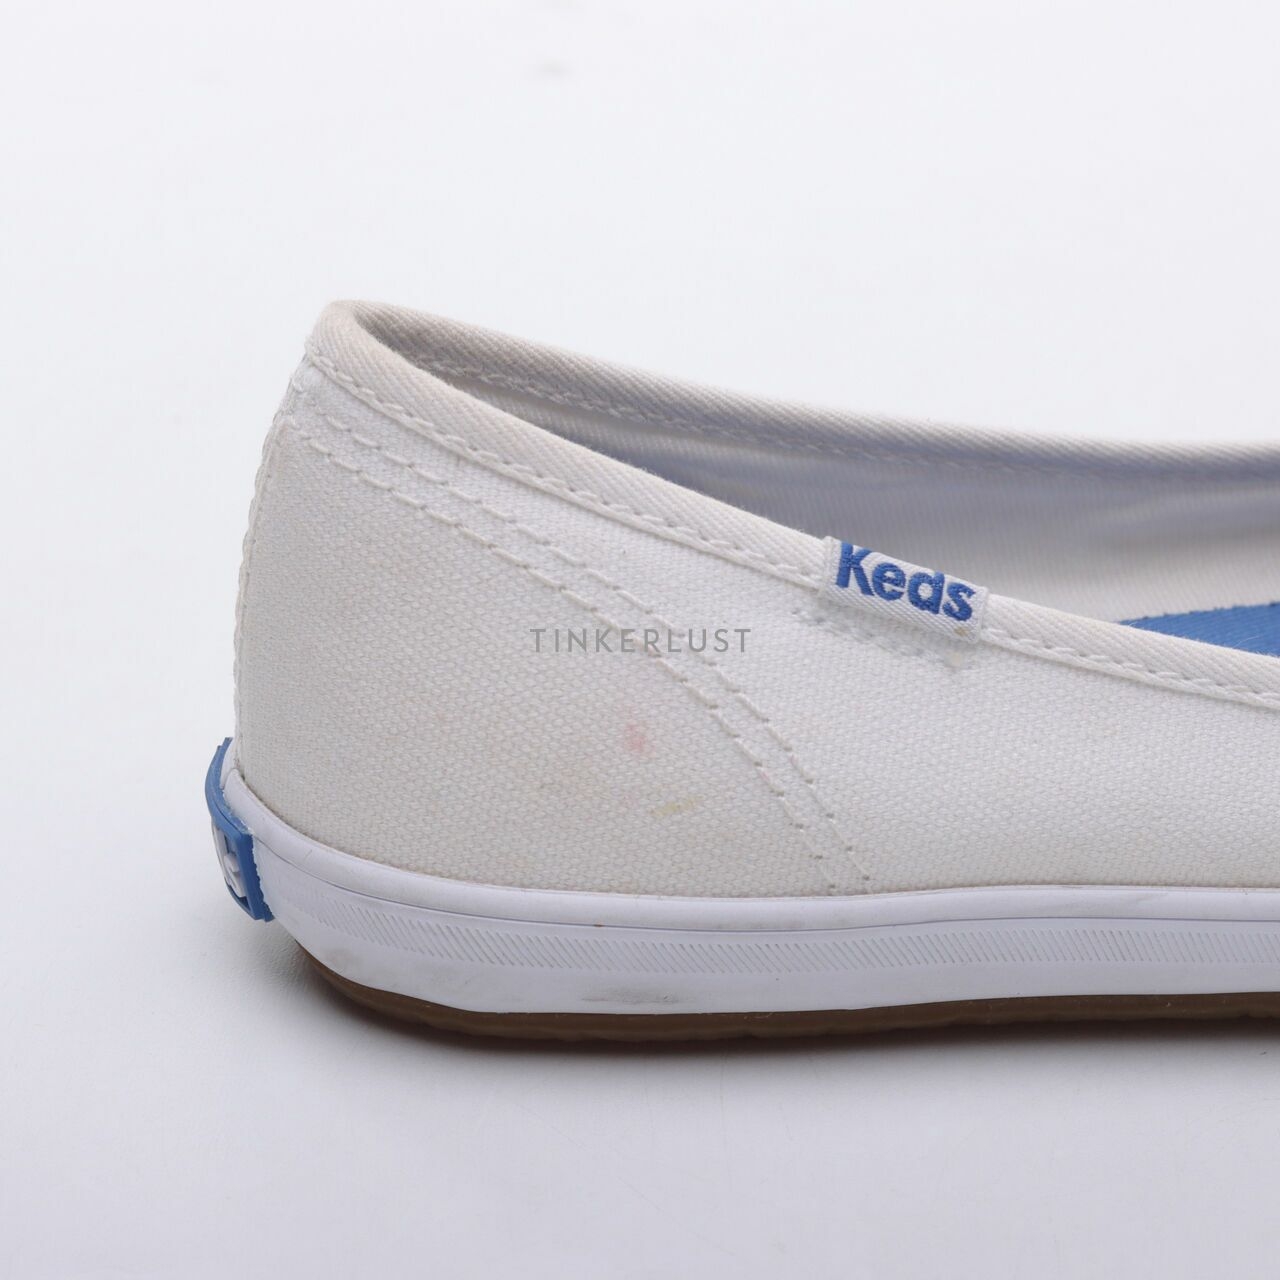 Keds Teacup Twill White Sneakers